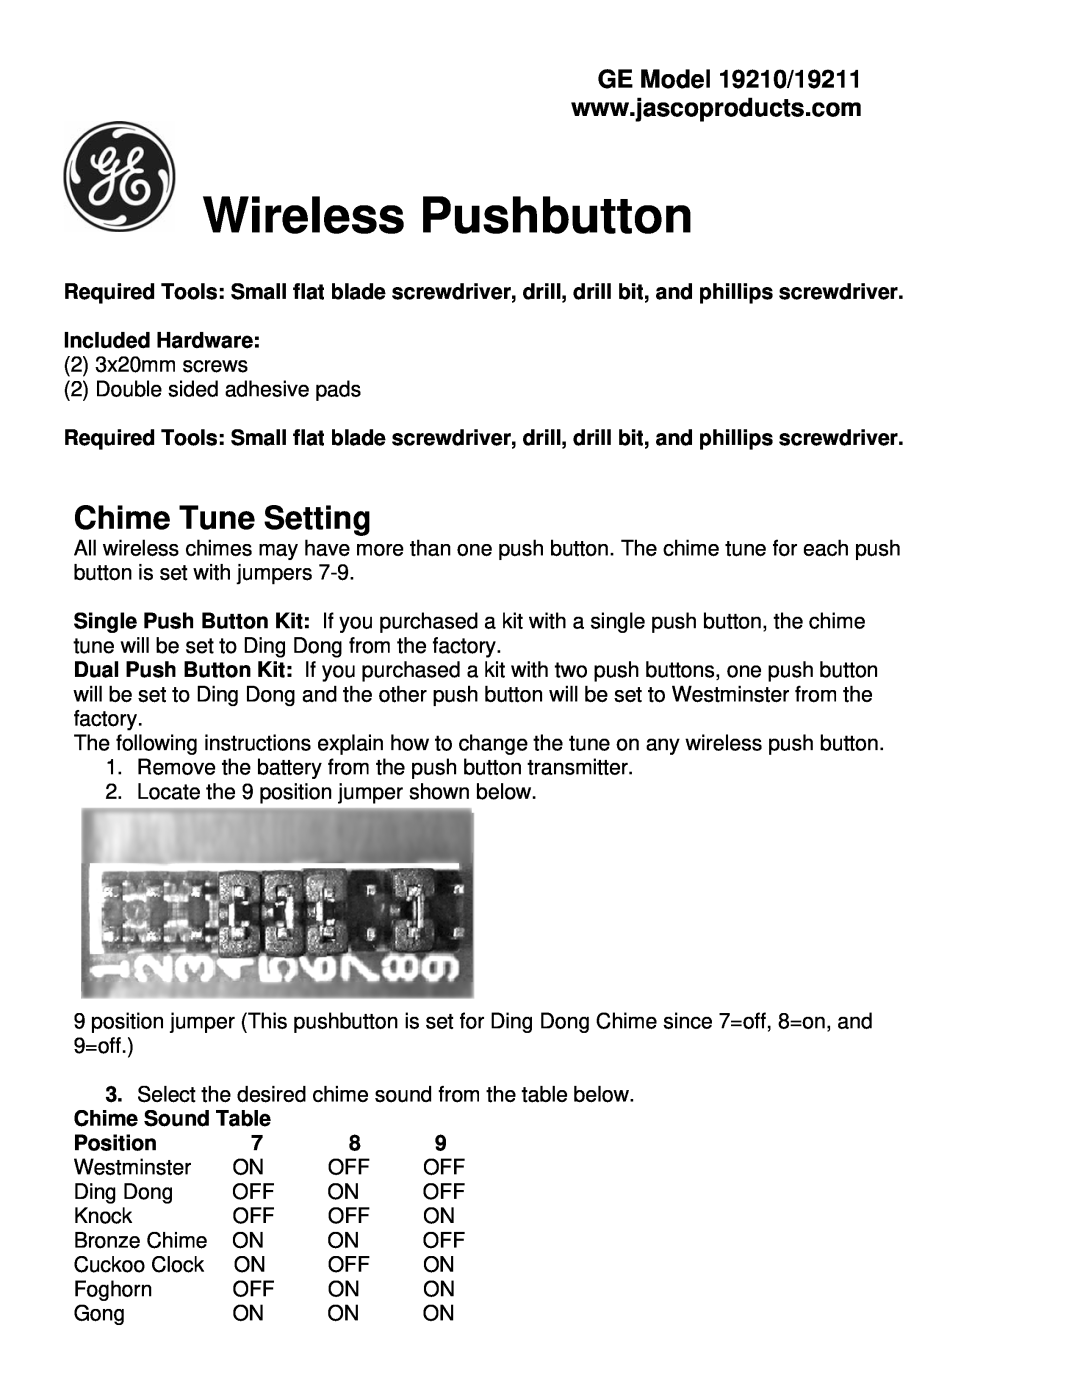 GE 19211, 19210 manual Chime Tune Setting, Included Hardware, Chime Sound Table Position 7 8, Wireless Pushbutton 